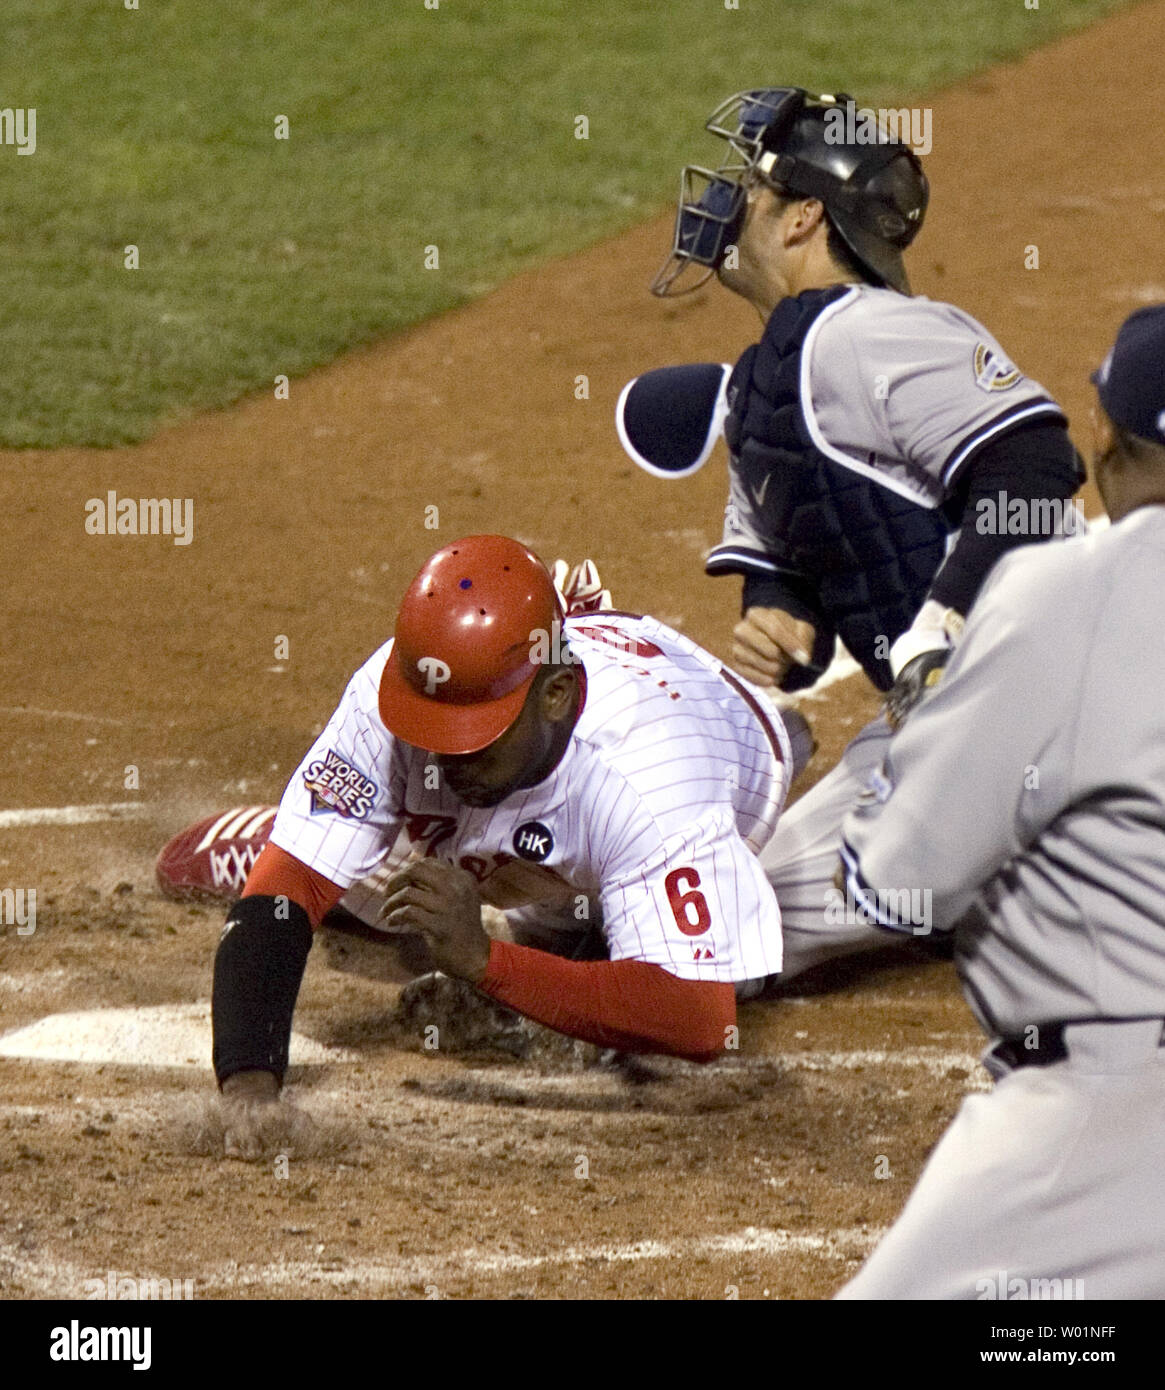 Philadelphia Phillies Ryan Howard safely slides into home during the fourth inning of game 4 of the World Series in Philadelphia on November 1, 2009. Catching for the New York Yankees is Jorge Posada.     UPI/John Anderson Stock Photo